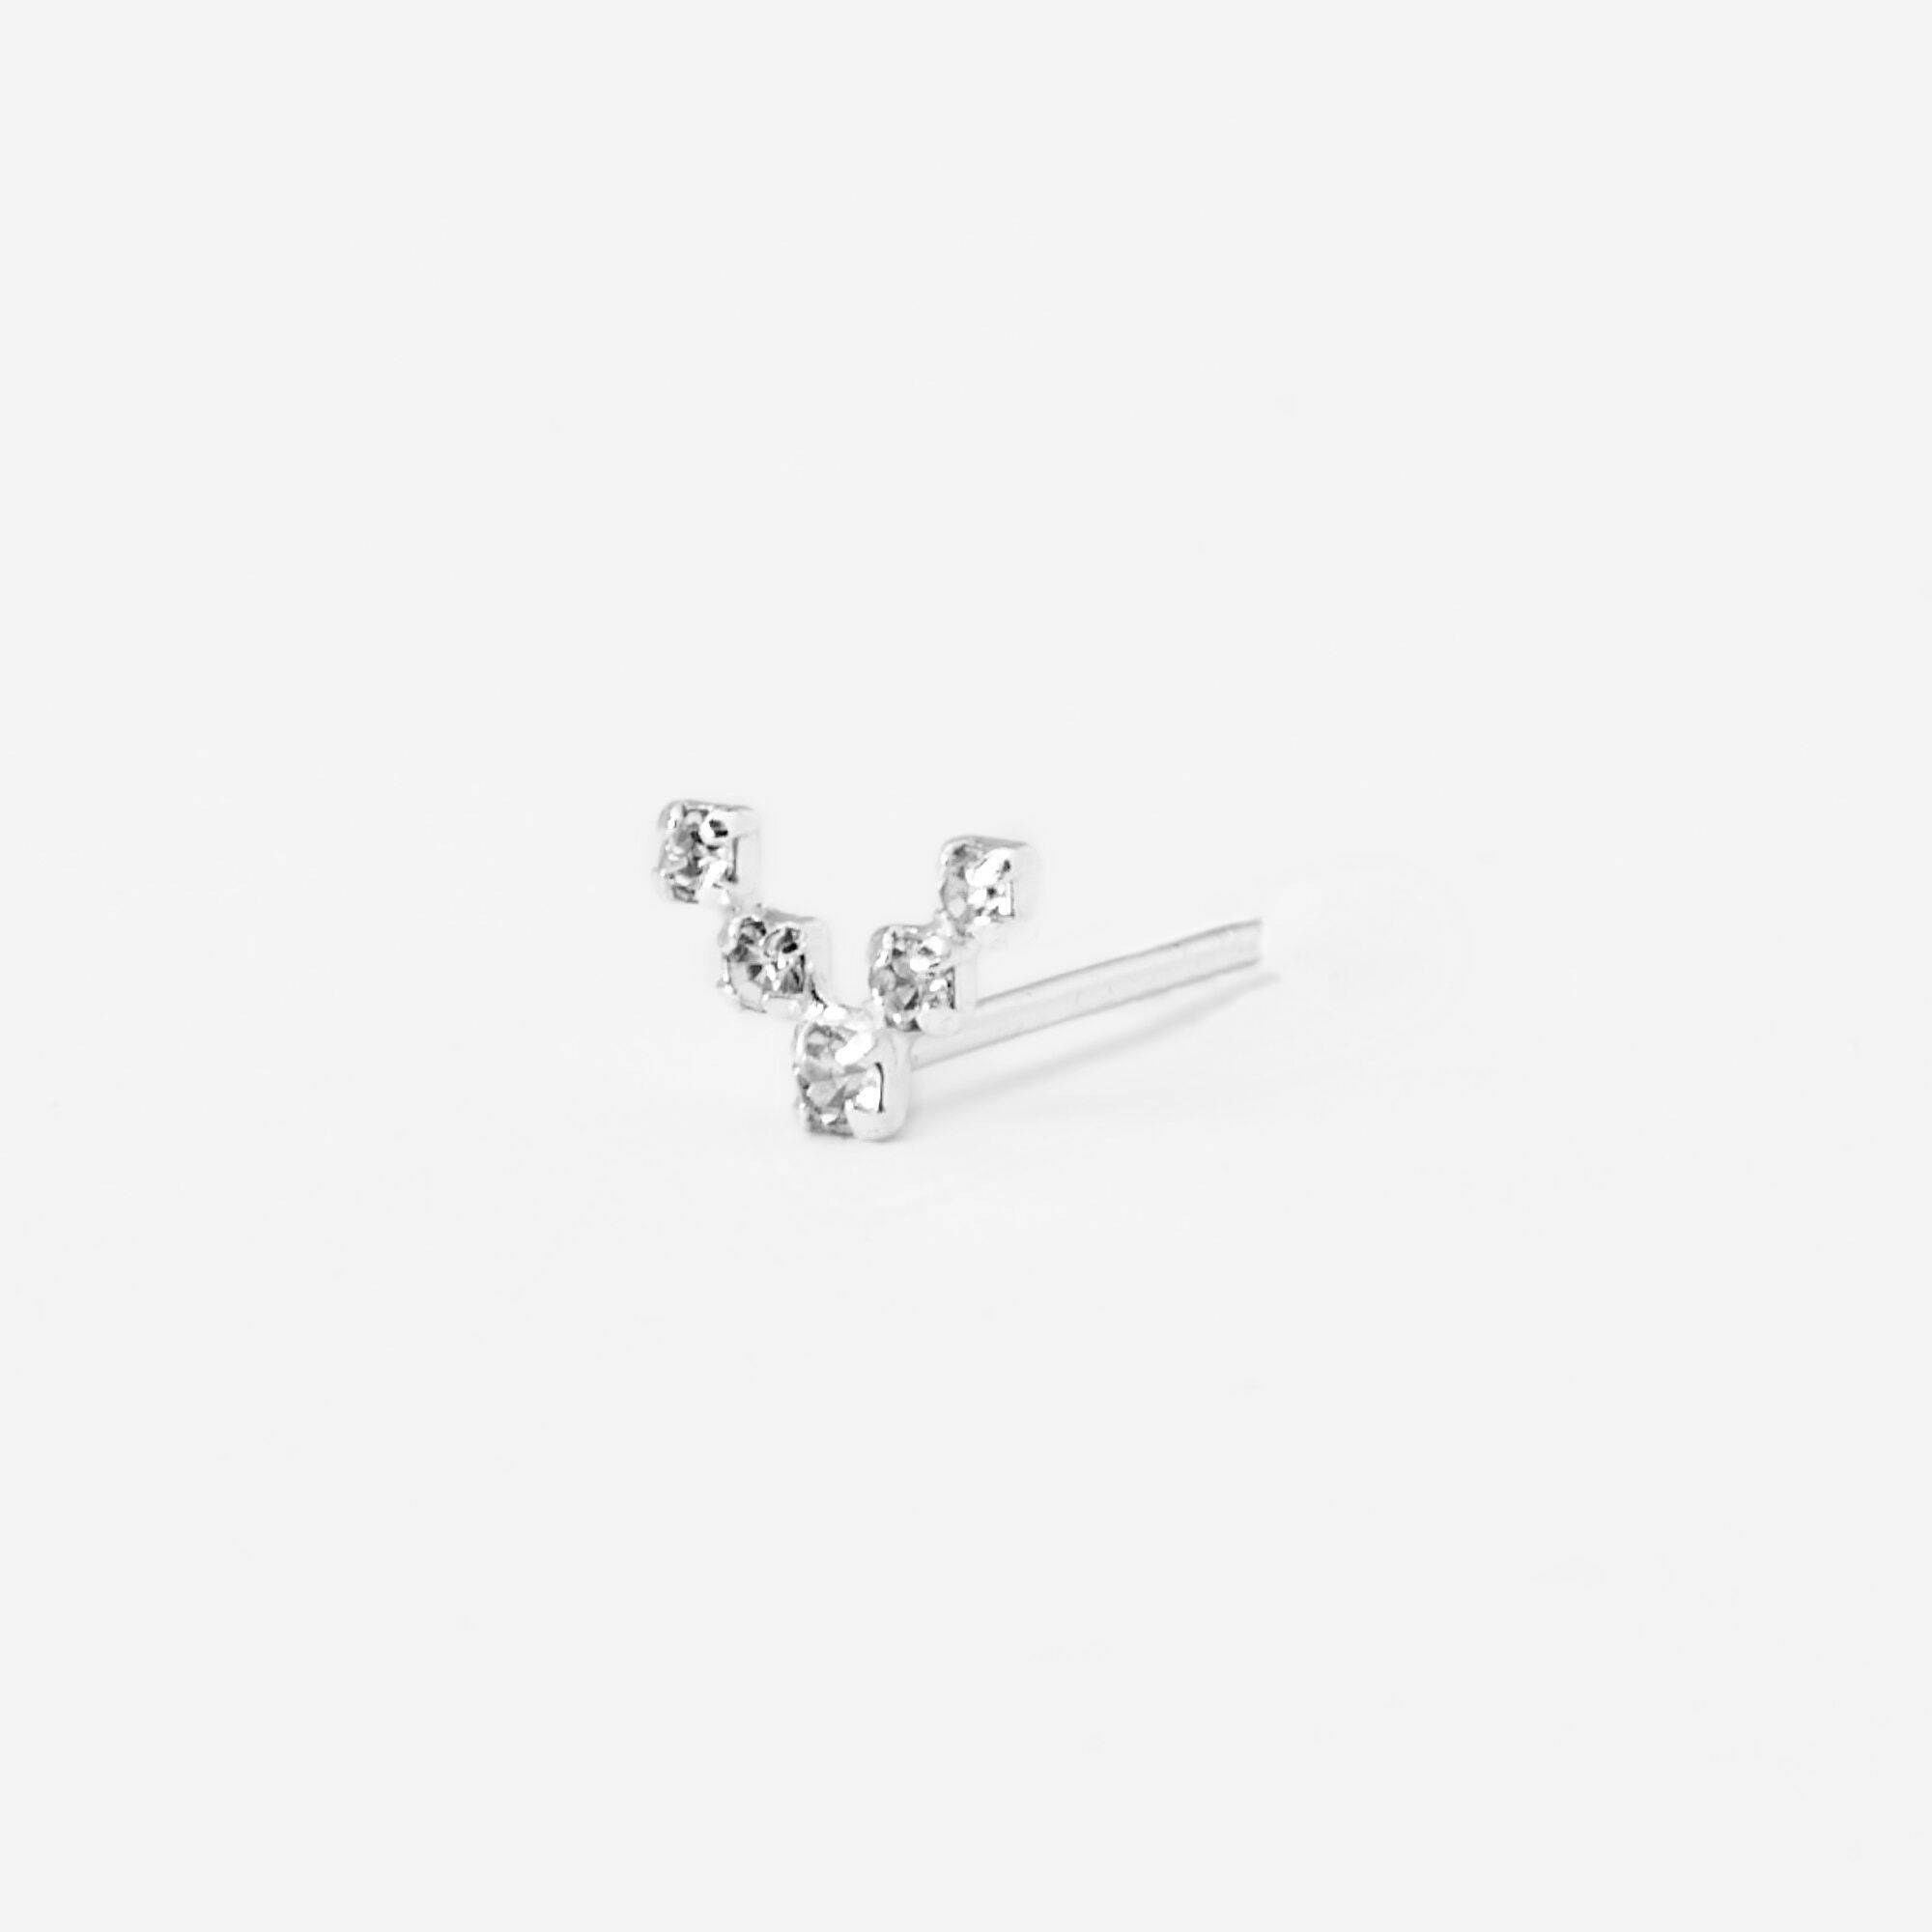 View Claires One Crystal Arrow Stud Earring Earrings Silver information